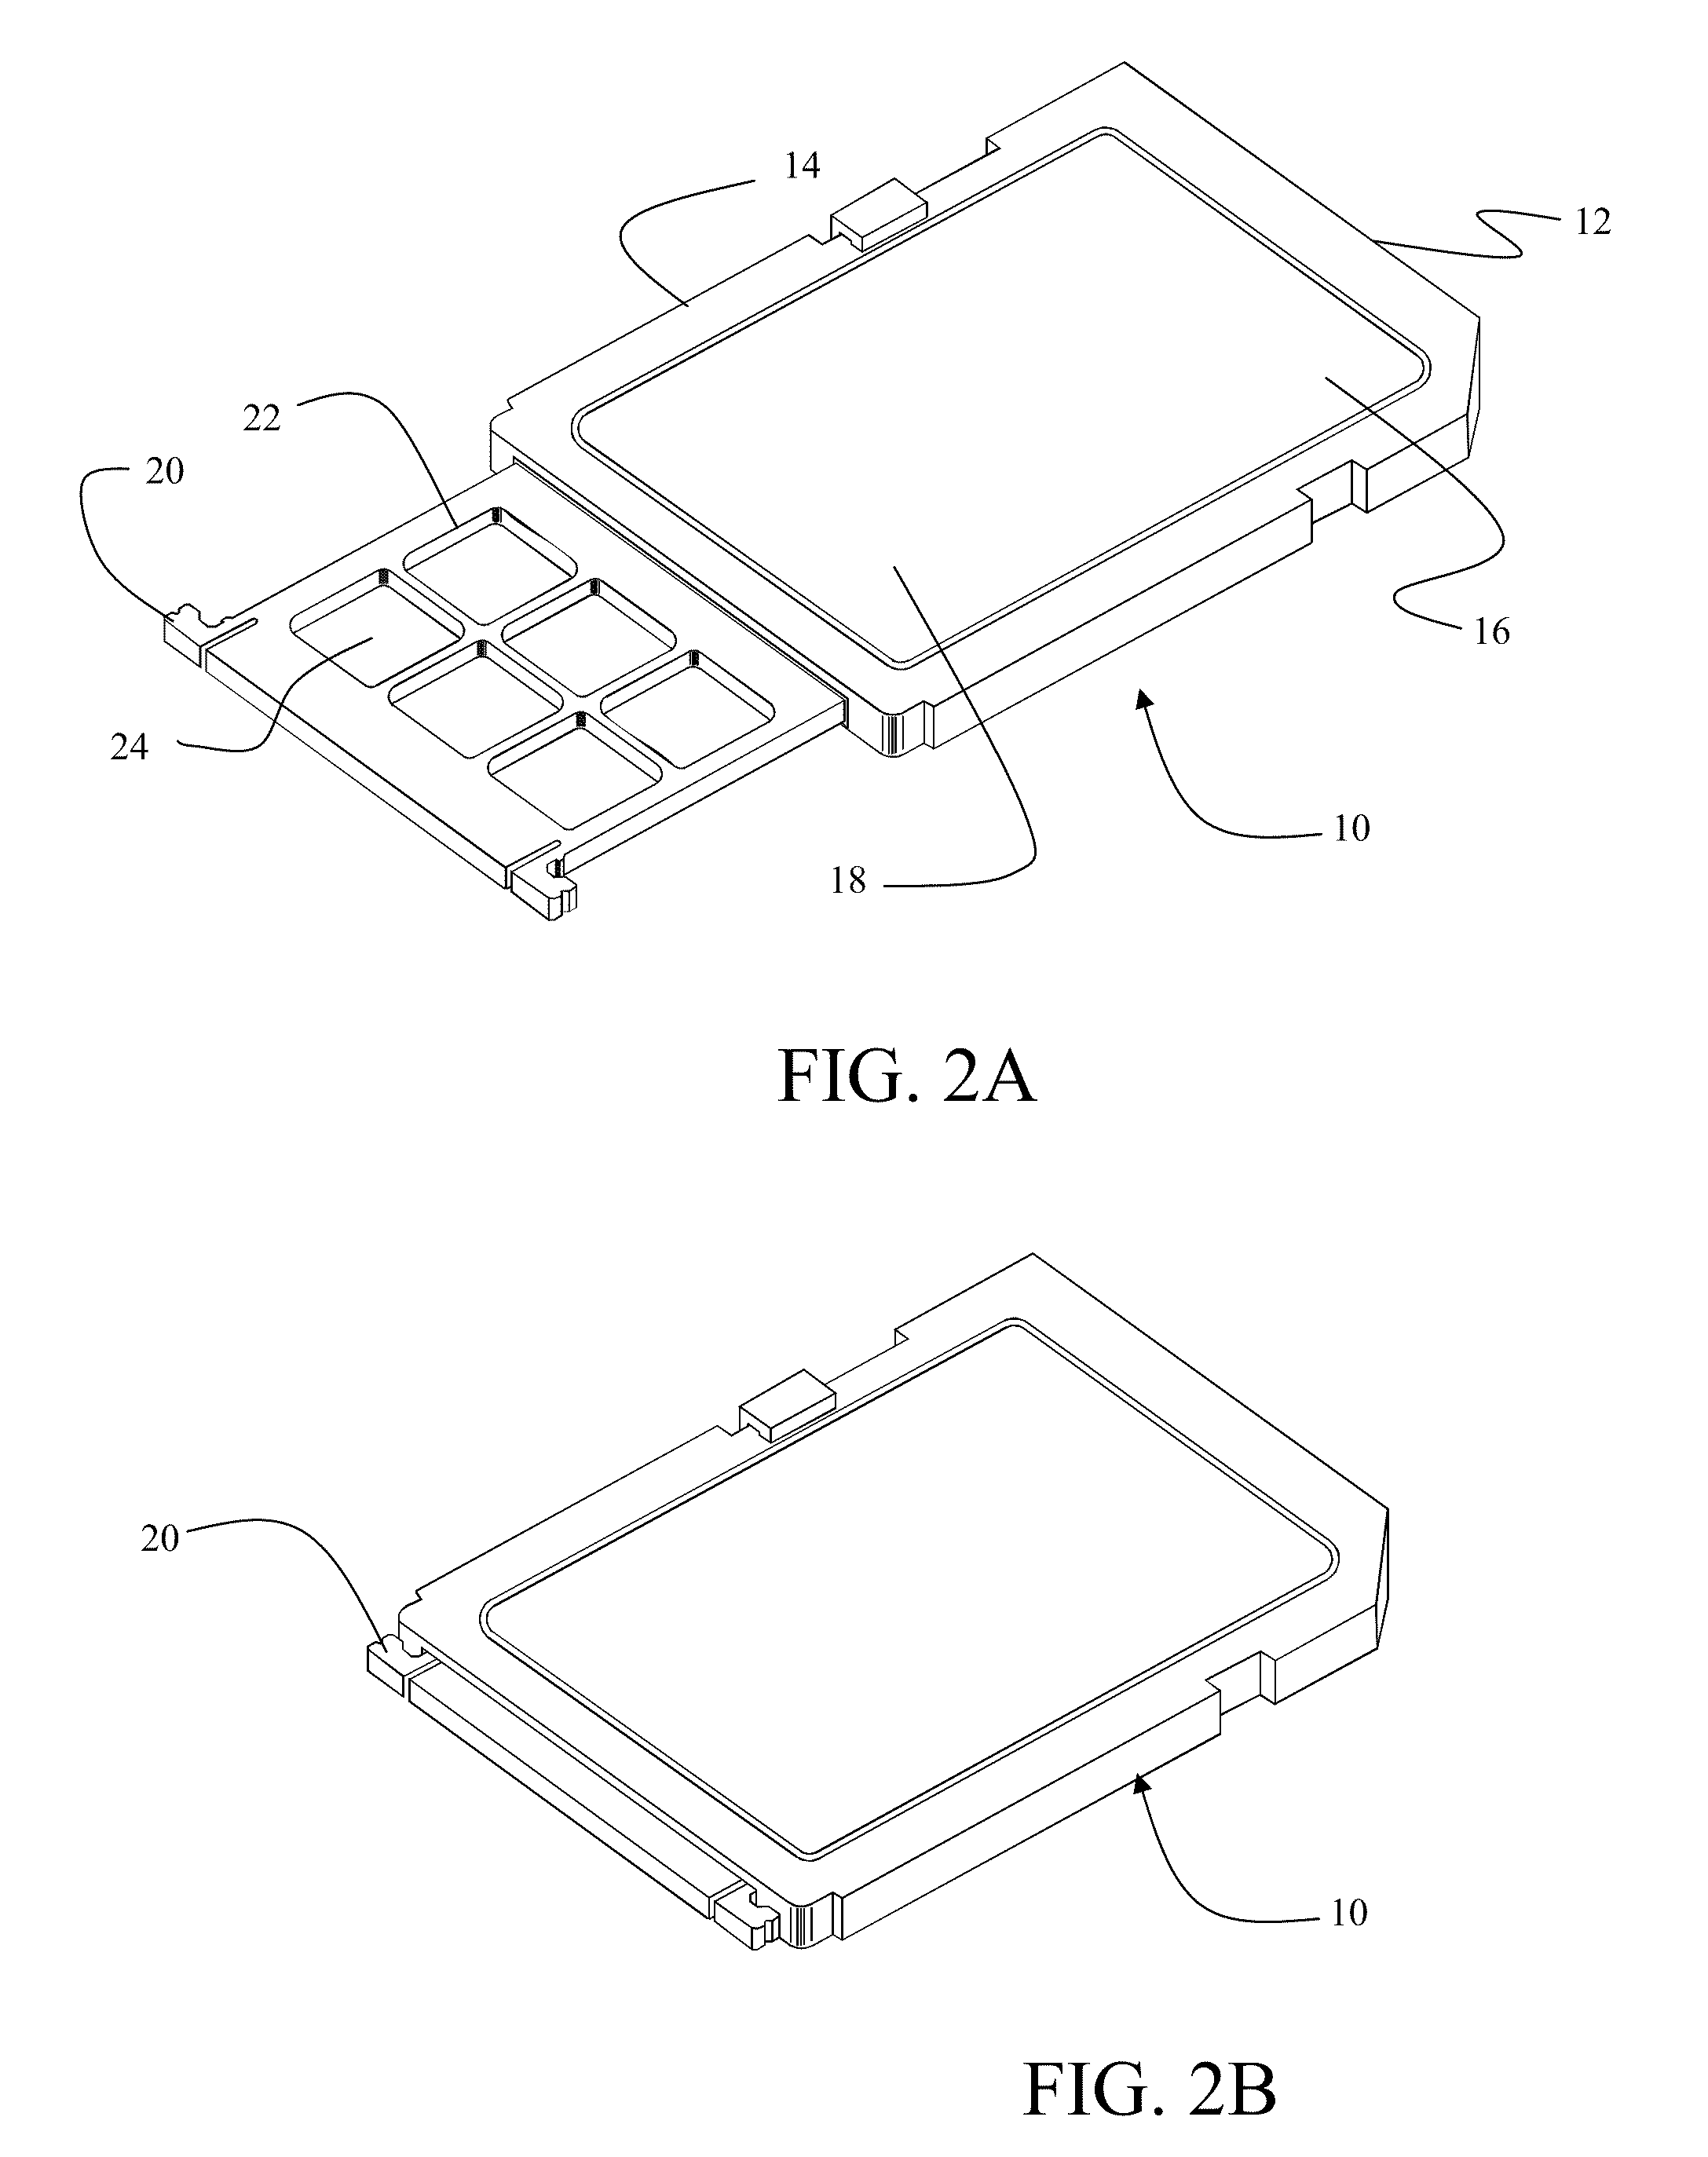 Data storage device with integrated DNA storage media